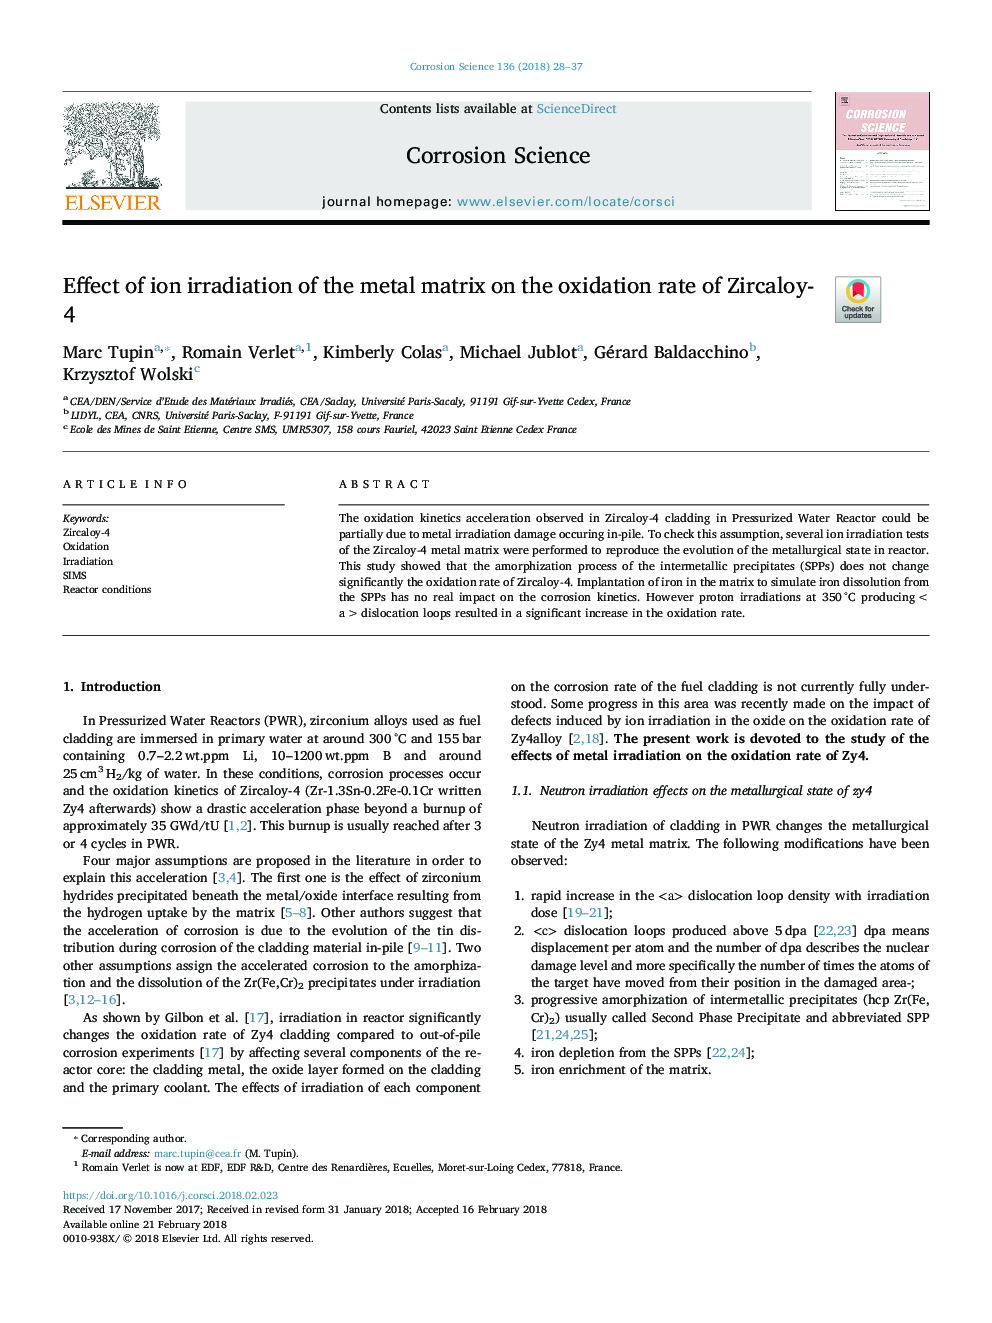 Effect of ion irradiation of the metal matrix on the oxidation rate of Zircaloy-4